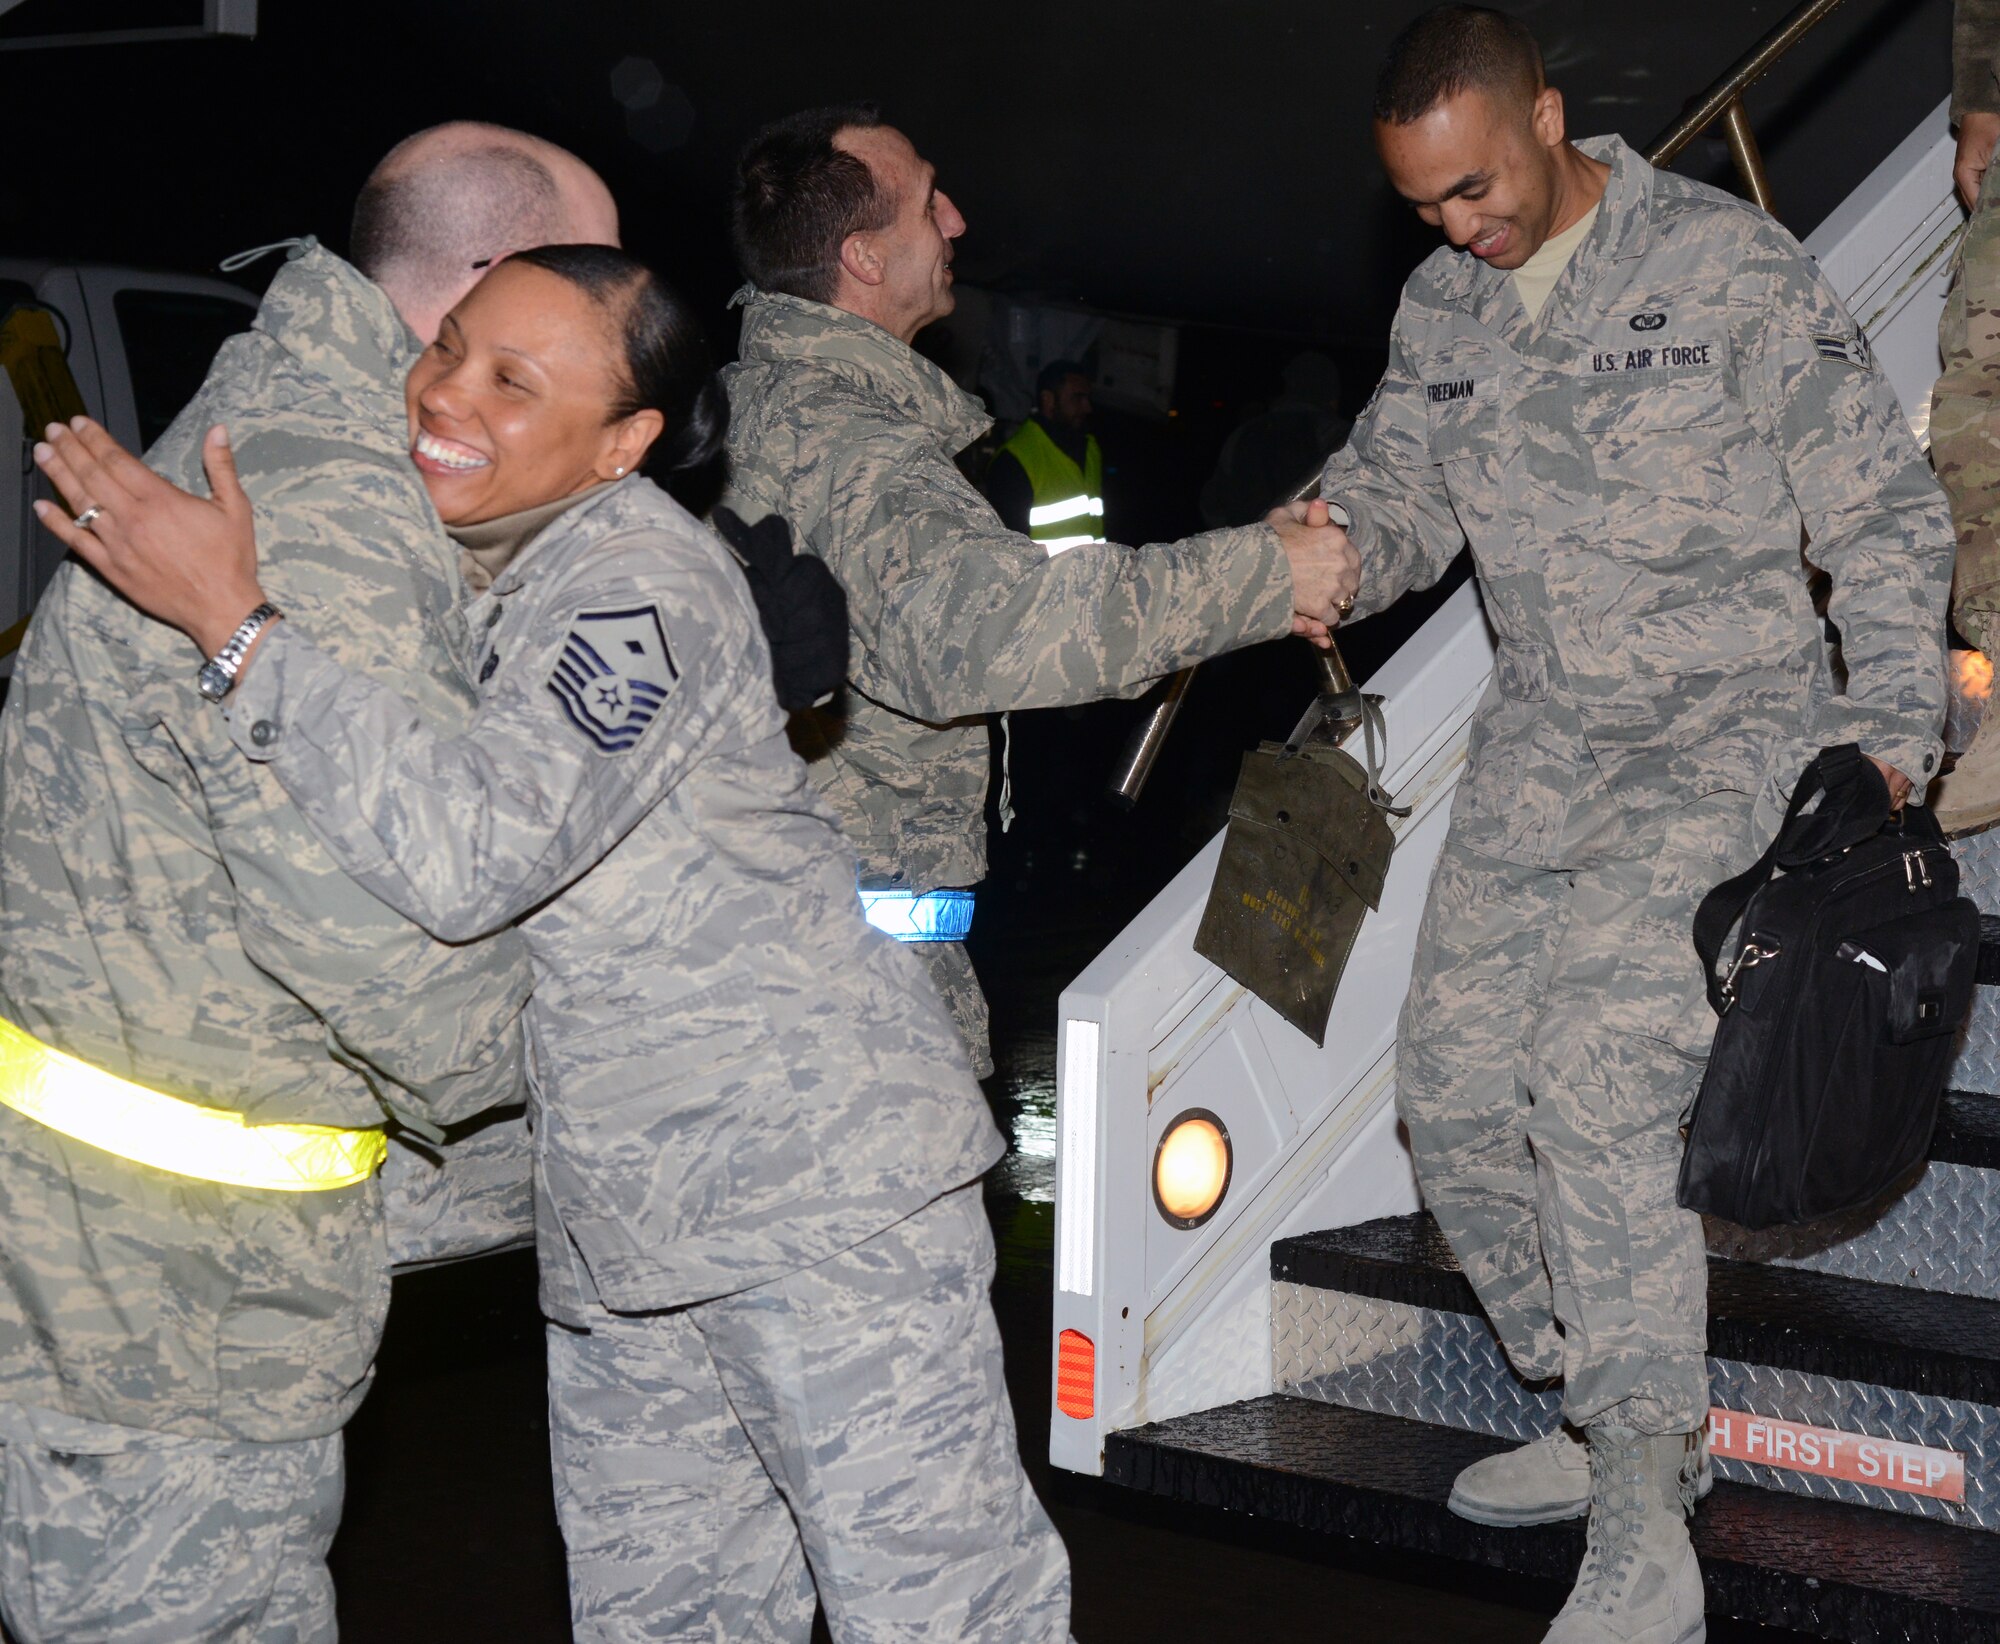 Brig. Gen. Scott Zobrist, 31st Fighter Wing commander and Chief Master Sgt. Jeffrey Craver, 31st FW command chief, greet members of the 603rd Air Control Squadron upon returning from deployment Jan. 19, 2013 at Aviano Air Base, Italy. The unit returned from their final deployment before the squadron is deactivated later this year. Since the start of the squadron's deployment in July, the Airmen supported roughly 255,000 square miles of airspace in Afghanistan, while providing support for more than 35,000 Coalition combat sorties. (U.S. Air Force photo/Senior Airman Michael Battles)